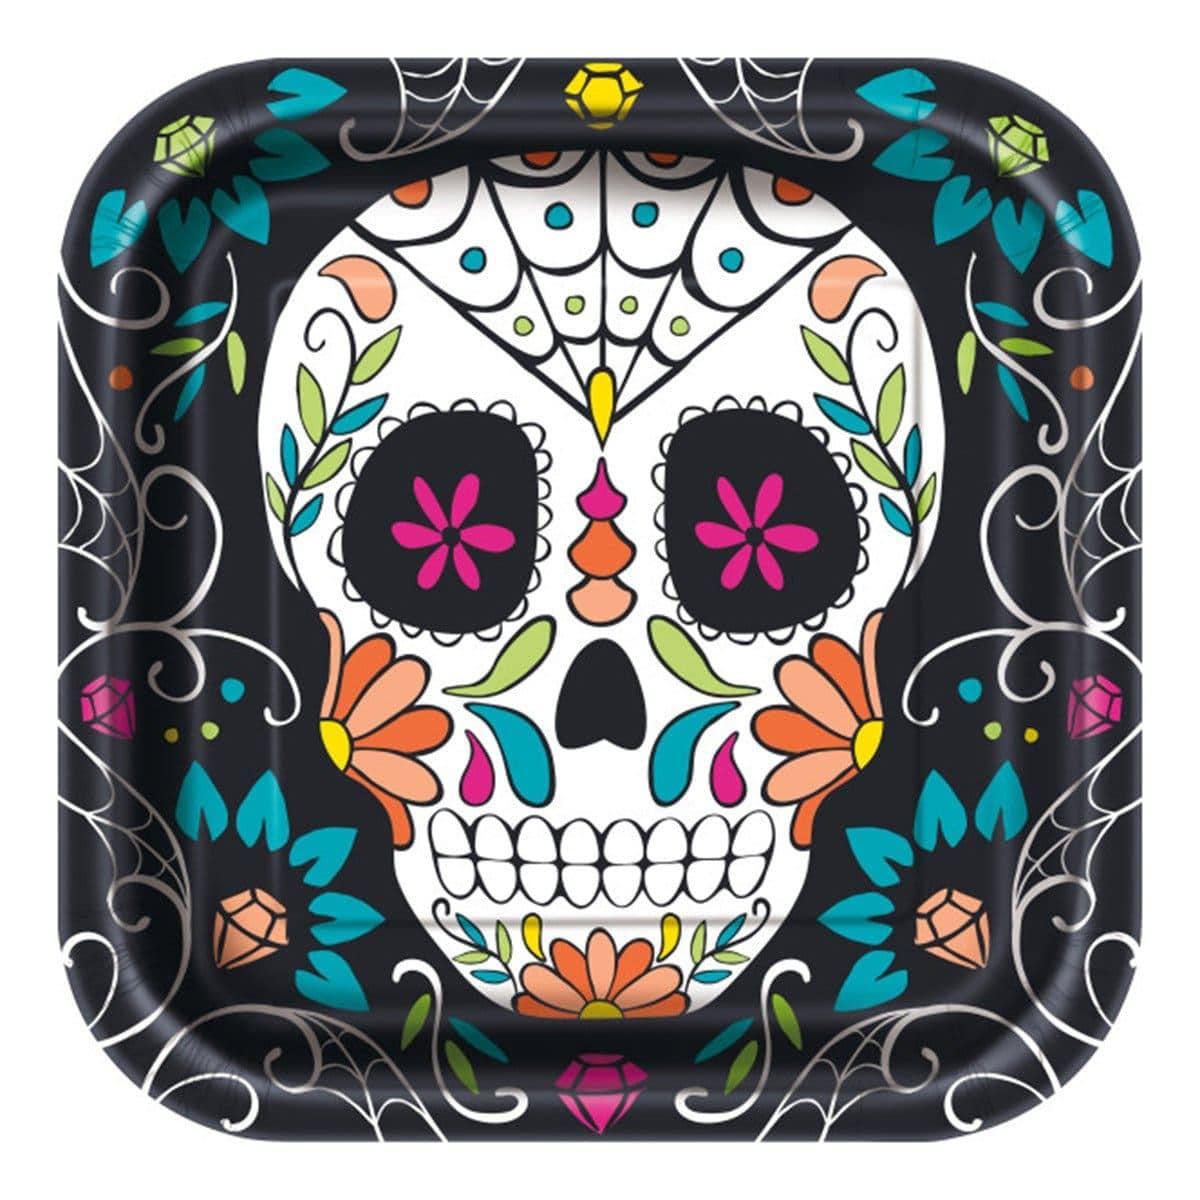 Buy Halloween Day of the Dead Sugar Skulls paper plates 9 inches, 8 per package sold at Party Expert